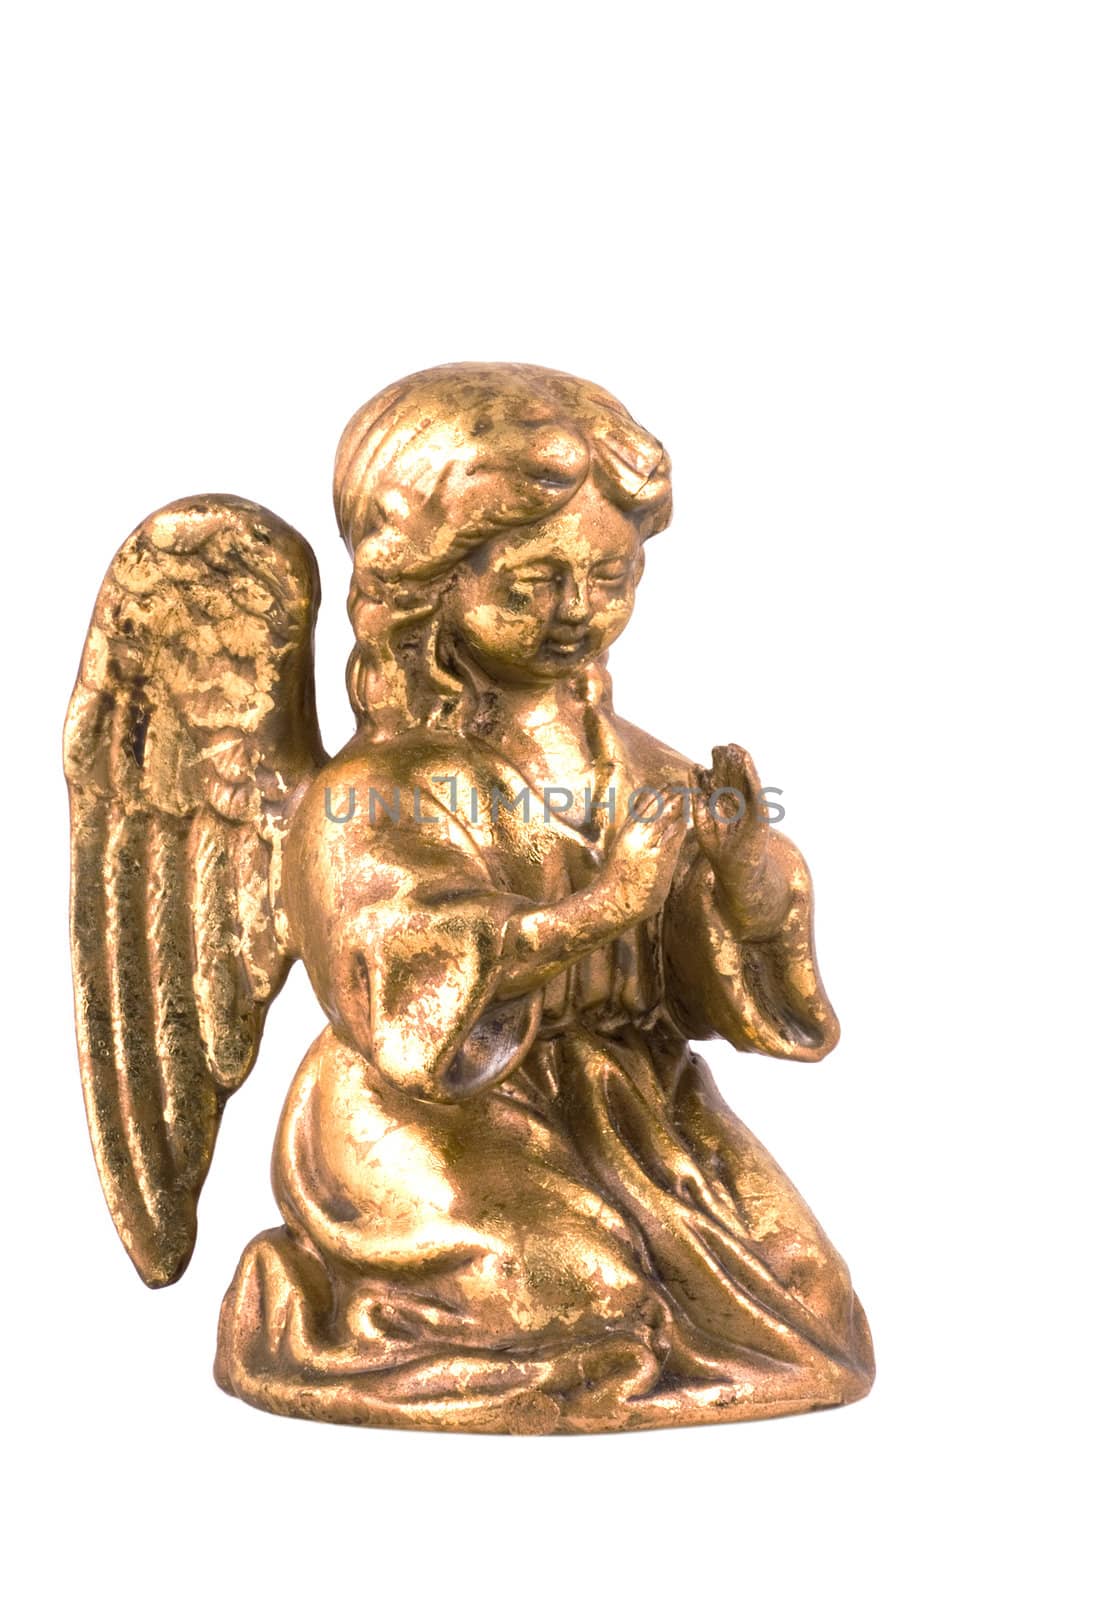 Little golden angel sitting on her knees praying, isolated on white.